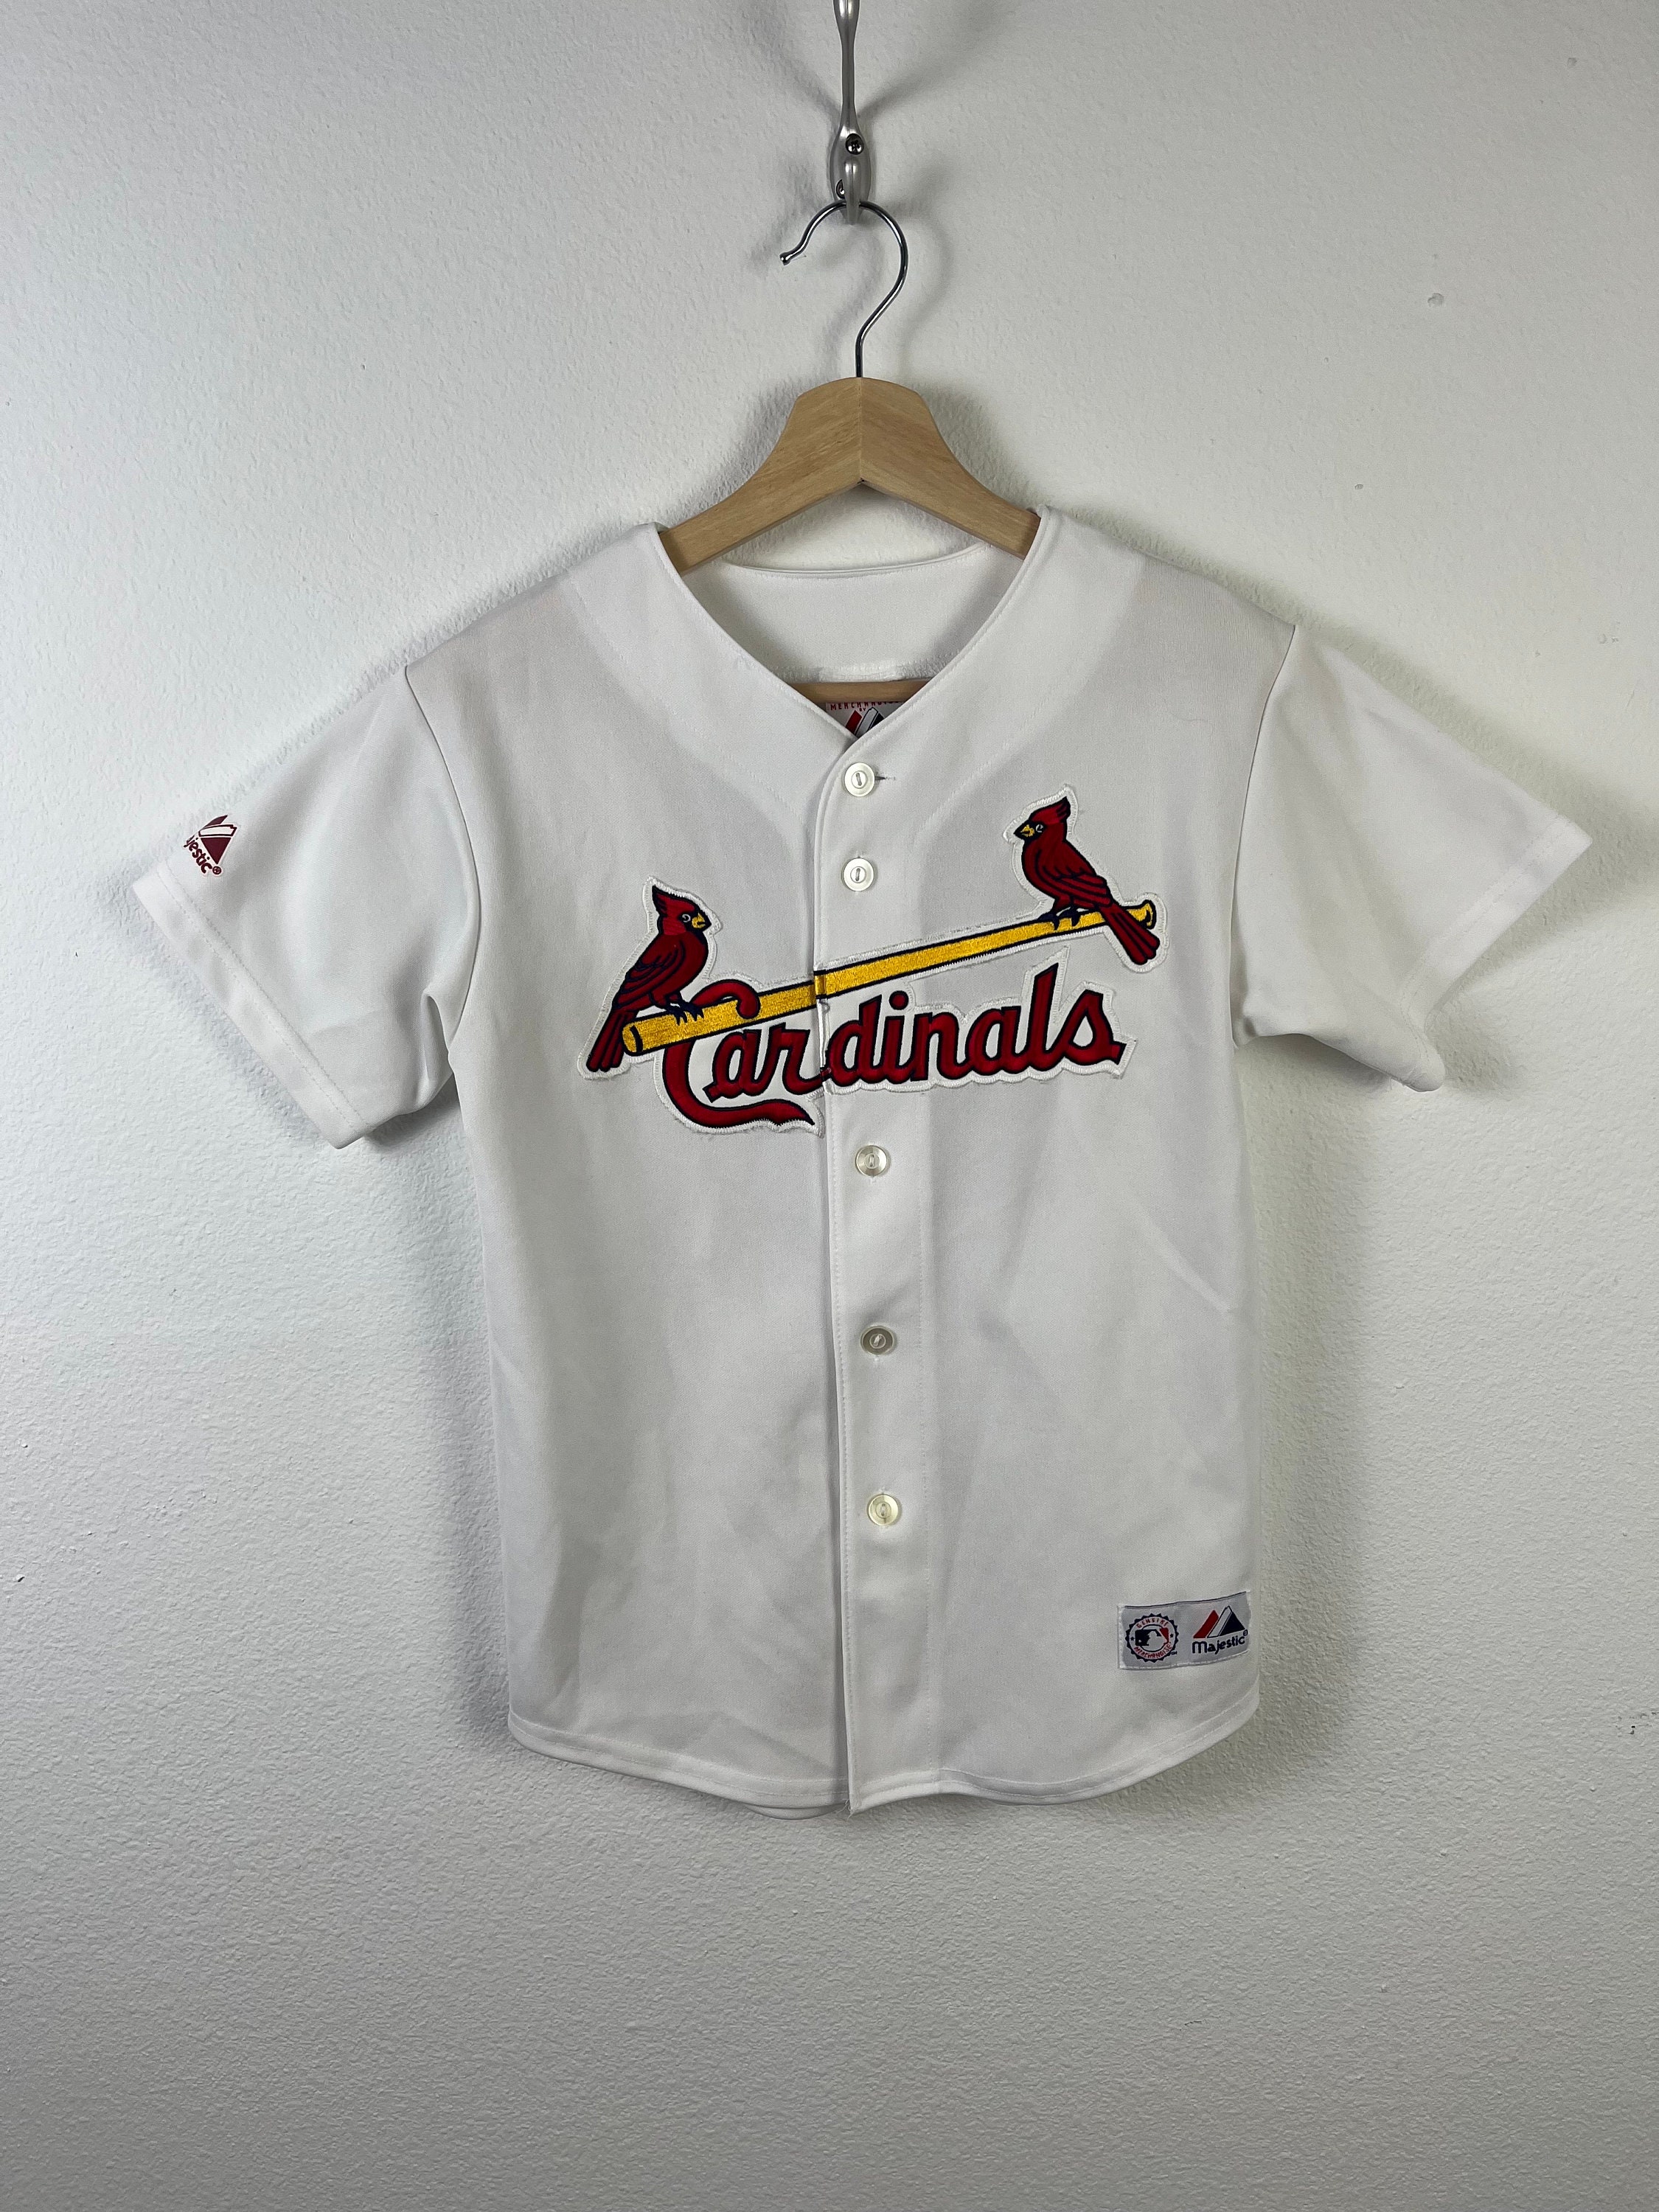 Buy MLB St. Louis Cardinals Clothes Hanger Set Online at Low Prices in  India 